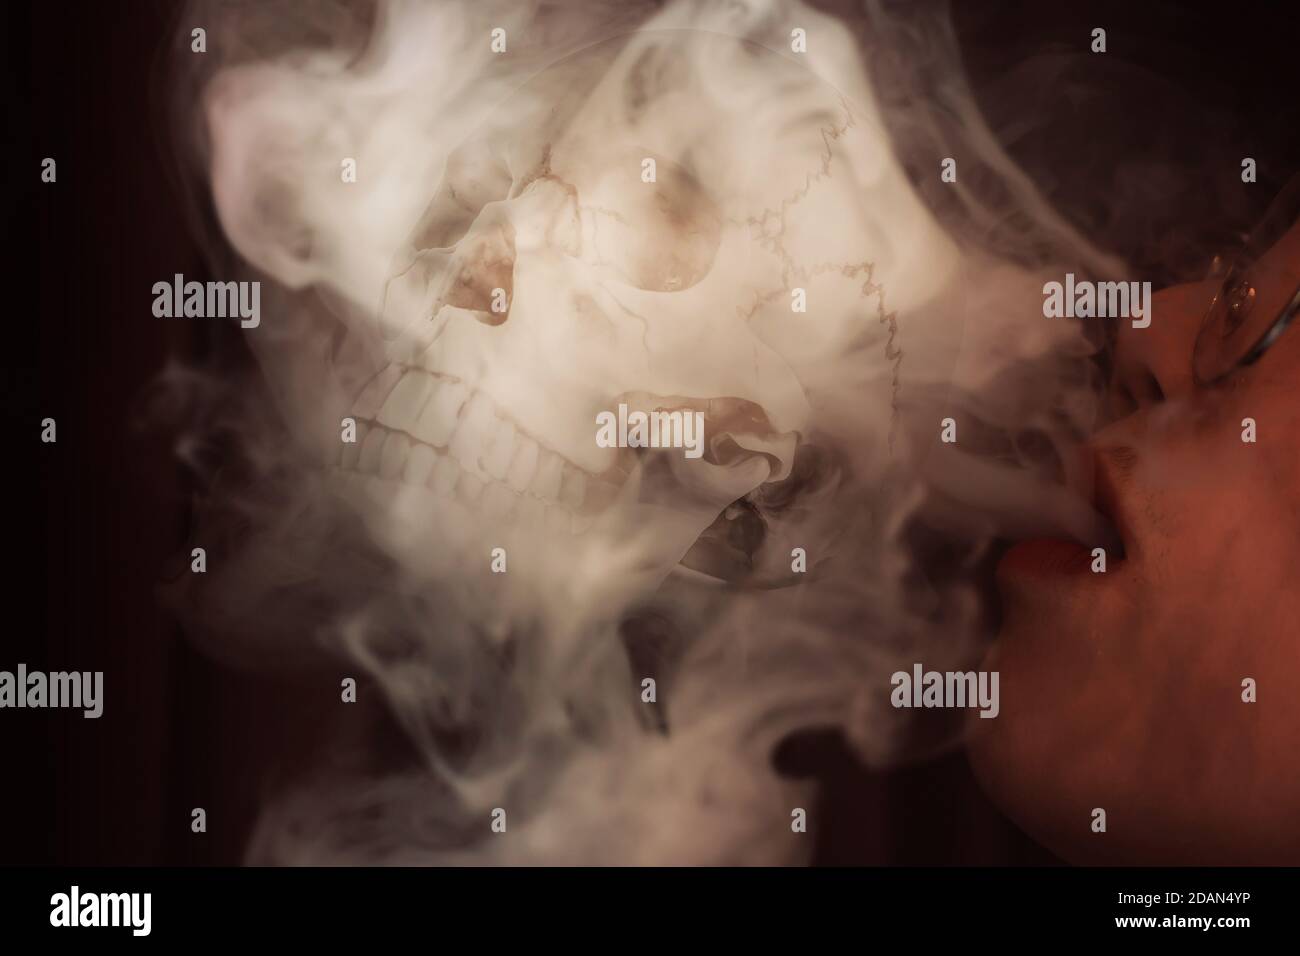 closeup woman smoking release smoke overlay with skull for death with lung cancer disease concept. Stock Photo